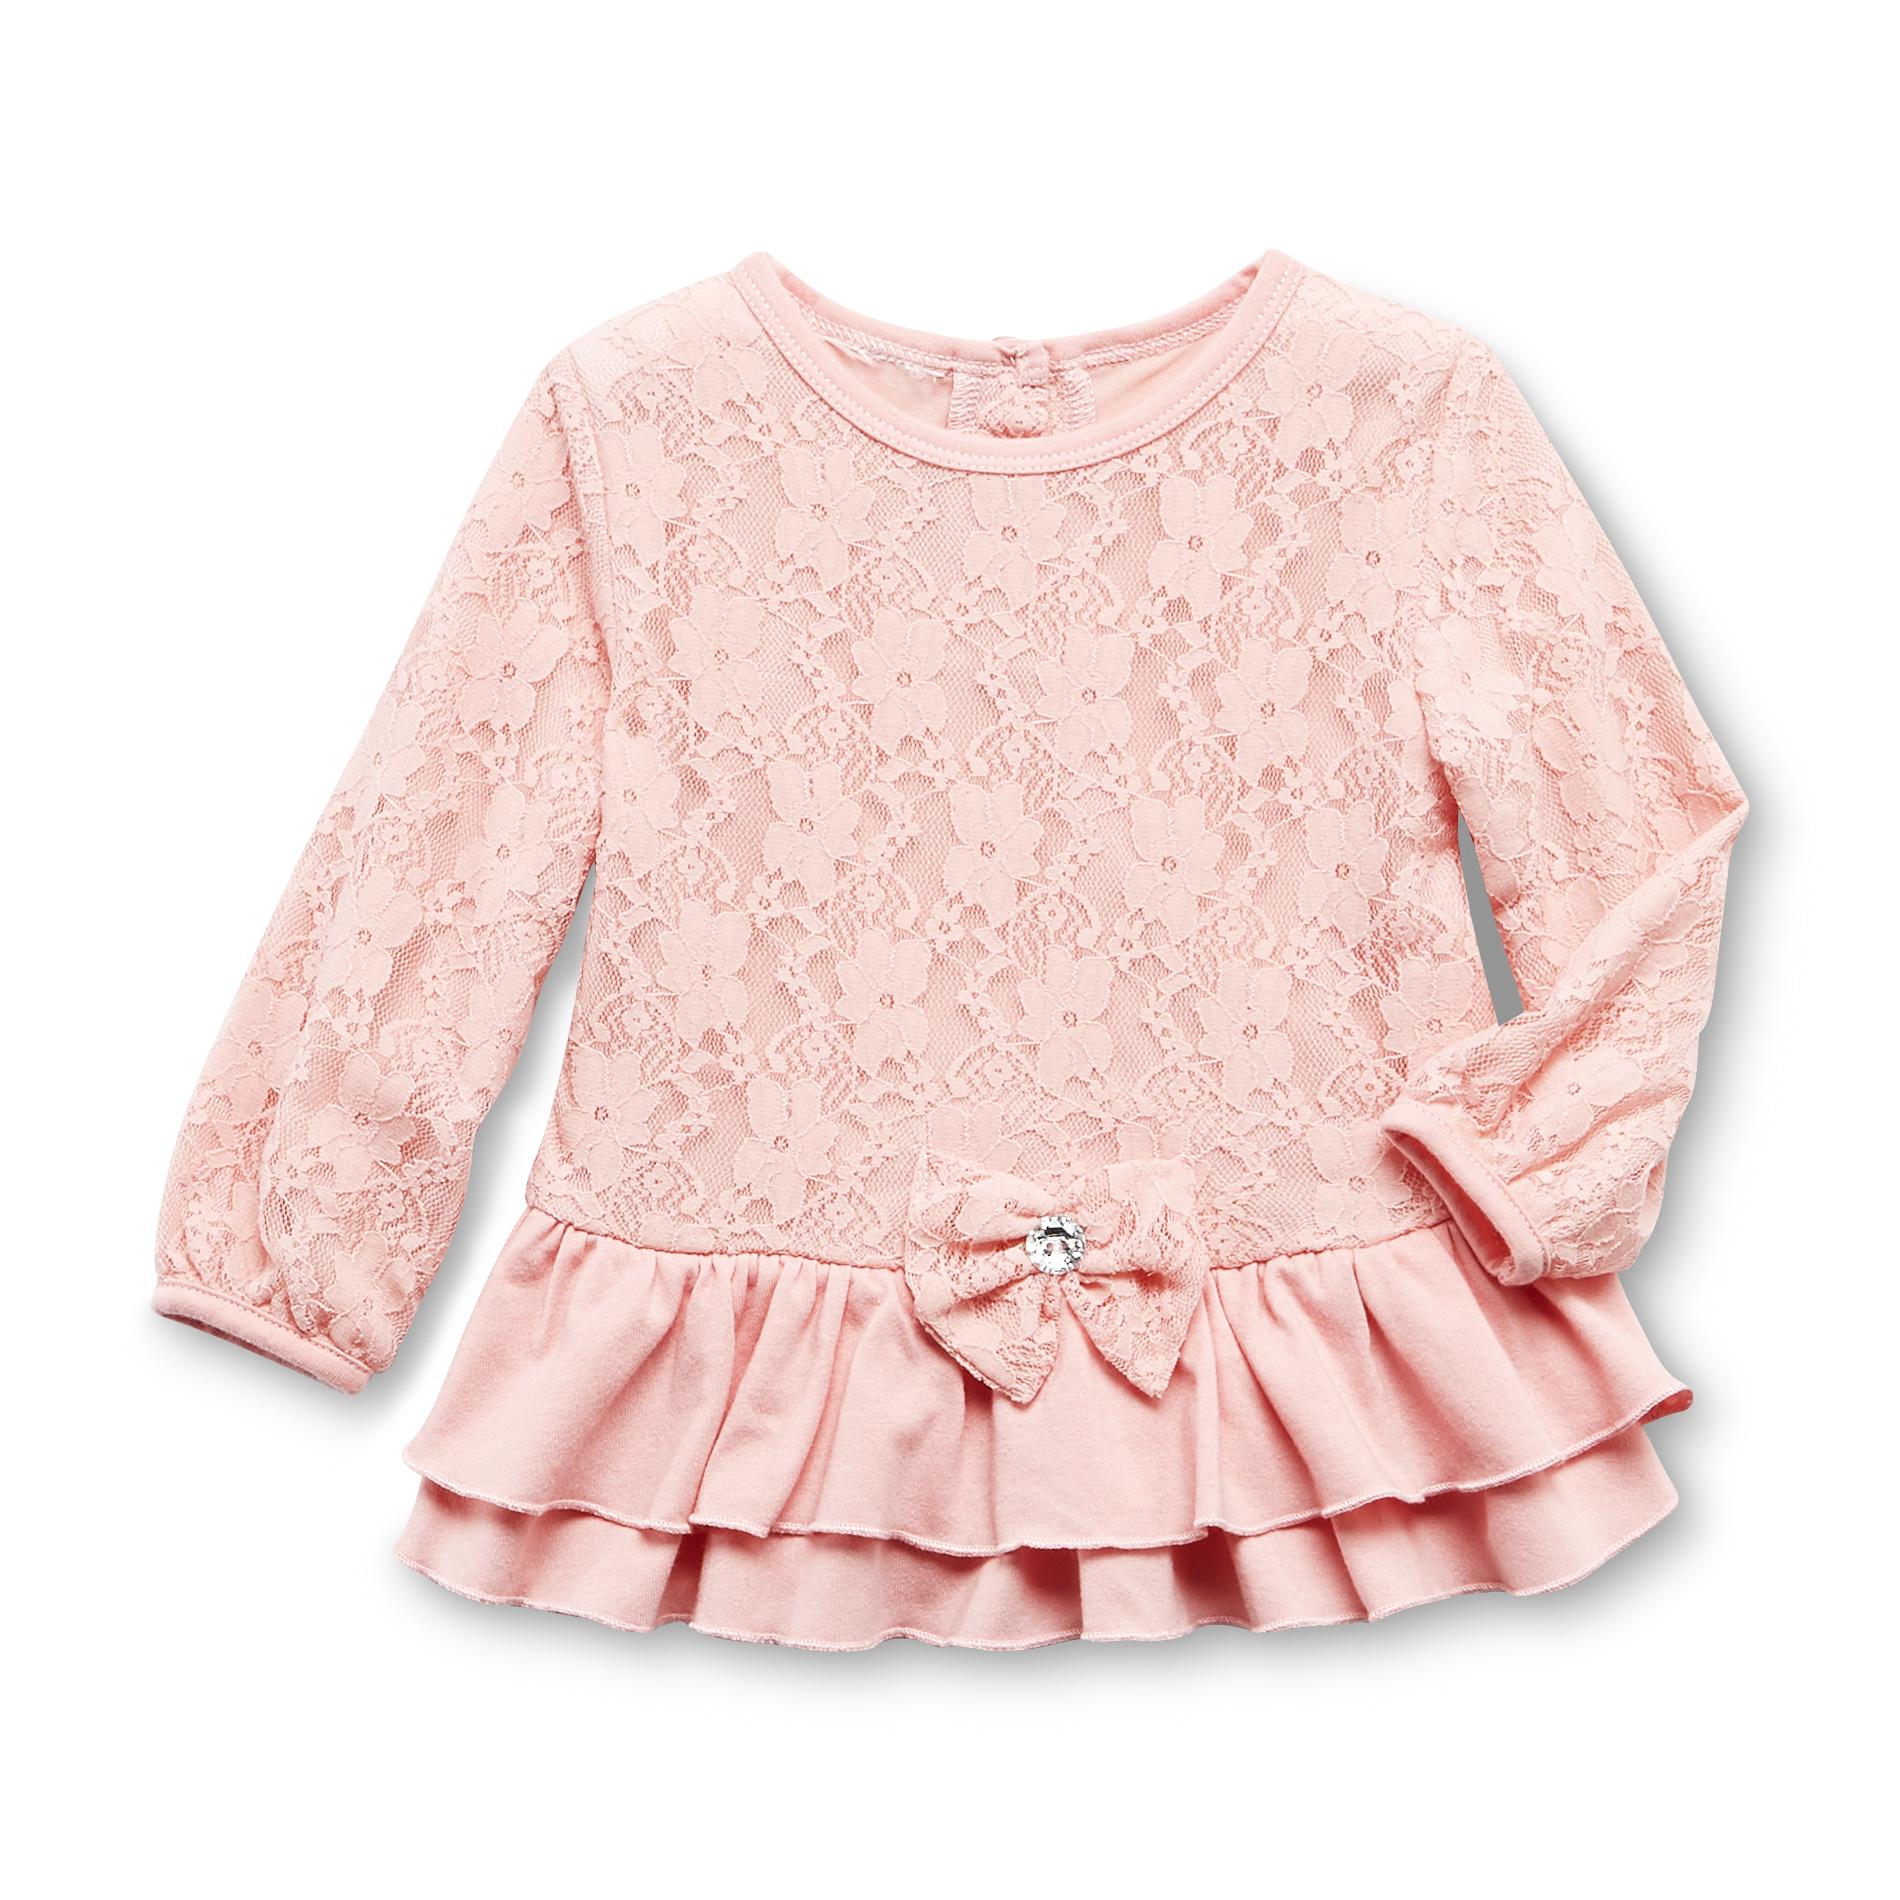 Route 66 Infant & Toddler Girl's Long-Sleeve Top - Floral Lace